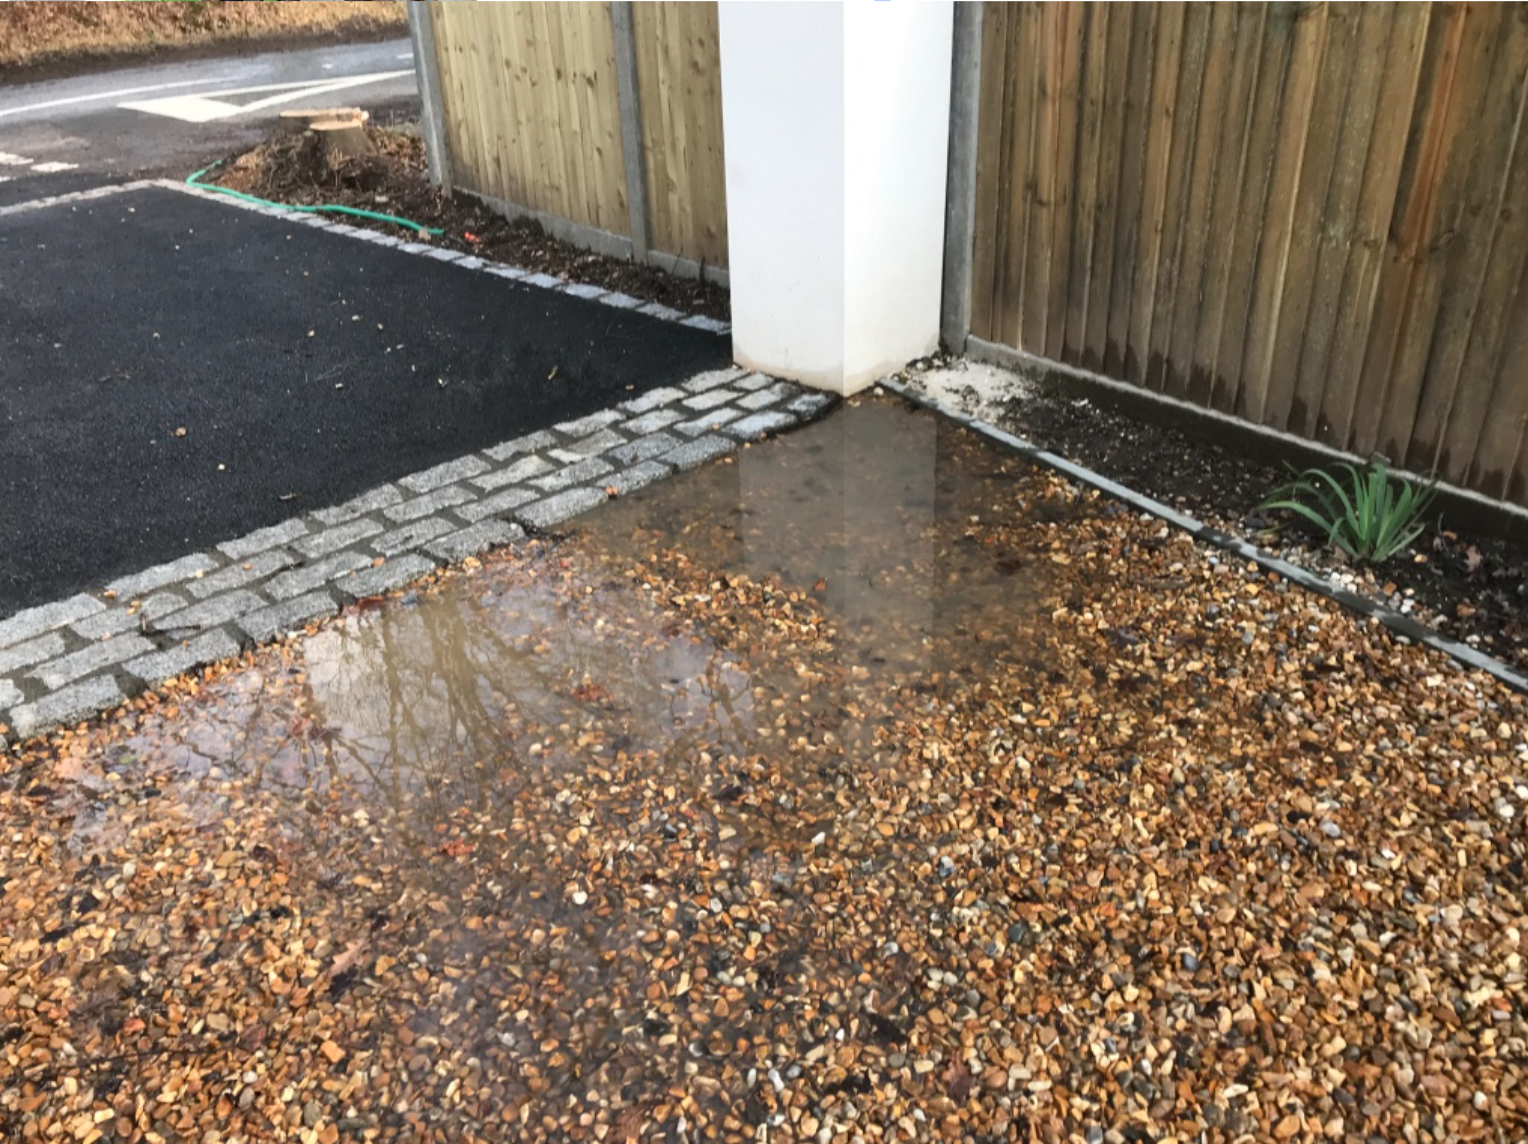 Preventative drainage maintenance can avoid expensive and troublesome surprises.